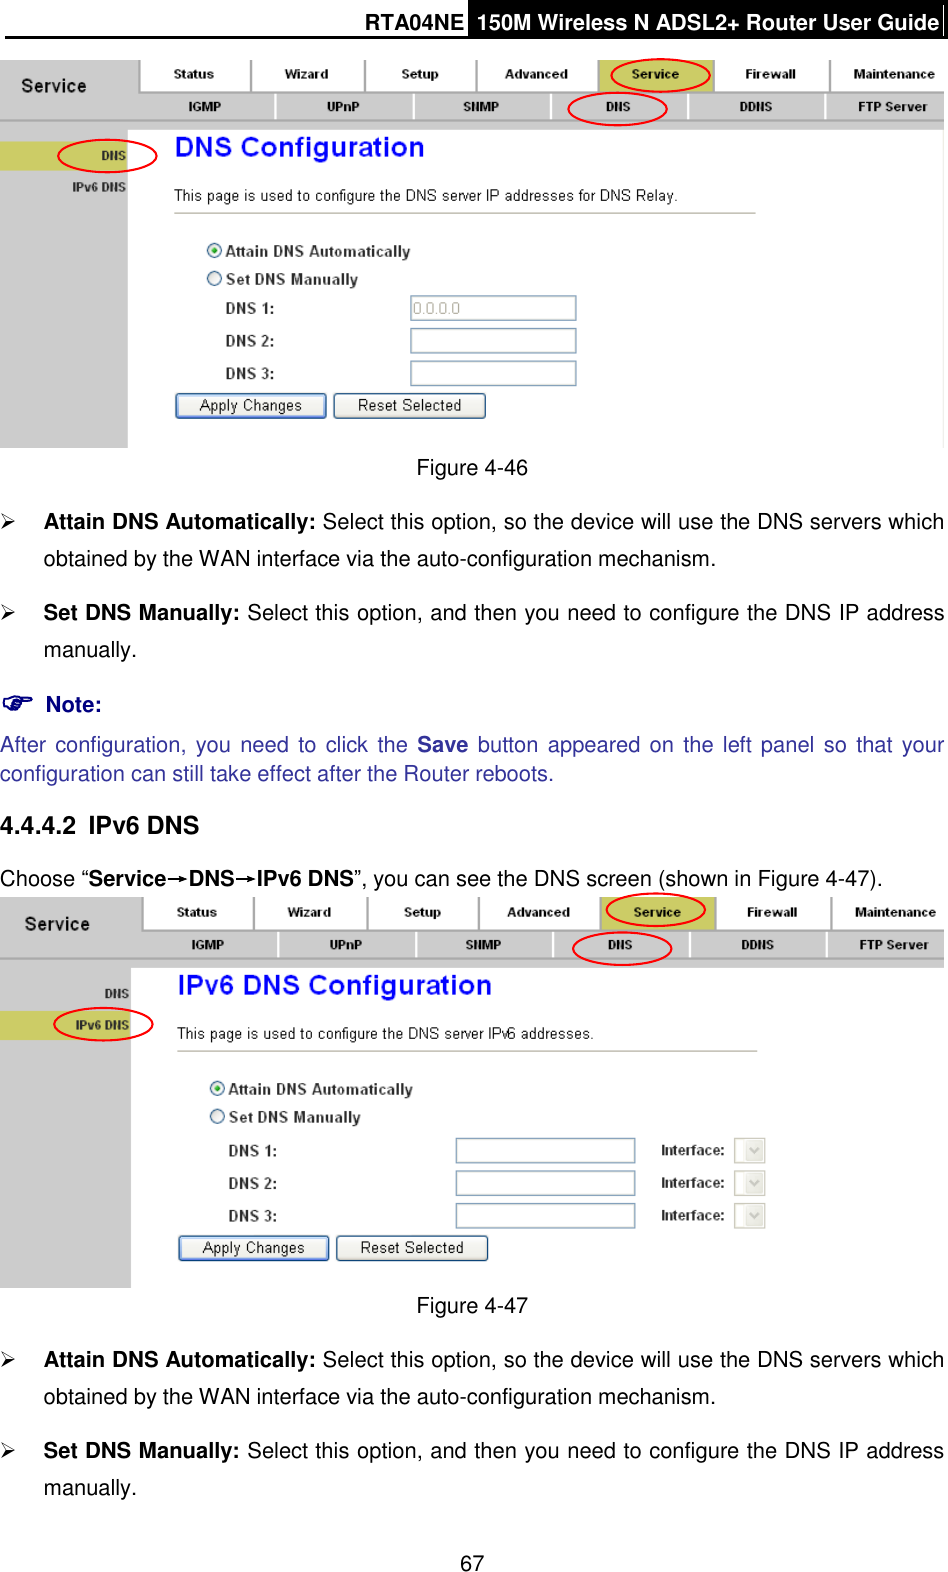 RTA04NE 150M Wireless N ADSL2+ Router User Guide  67  Figure 4-46  Attain DNS Automatically: Select this option, so the device will use the DNS servers which obtained by the WAN interface via the auto-configuration mechanism.  Set DNS Manually: Select this option, and then you need to configure the DNS IP address manually.  Note: After configuration, you need to click the Save button appeared on  the left panel so  that your configuration can still take effect after the Router reboots. 4.4.4.2  IPv6 DNS Choose “Service→DNS→IPv6 DNS”, you can see the DNS screen (shown in Figure 4-47).  Figure 4-47  Attain DNS Automatically: Select this option, so the device will use the DNS servers which obtained by the WAN interface via the auto-configuration mechanism.  Set DNS Manually: Select this option, and then you need to configure the DNS IP address manually. 